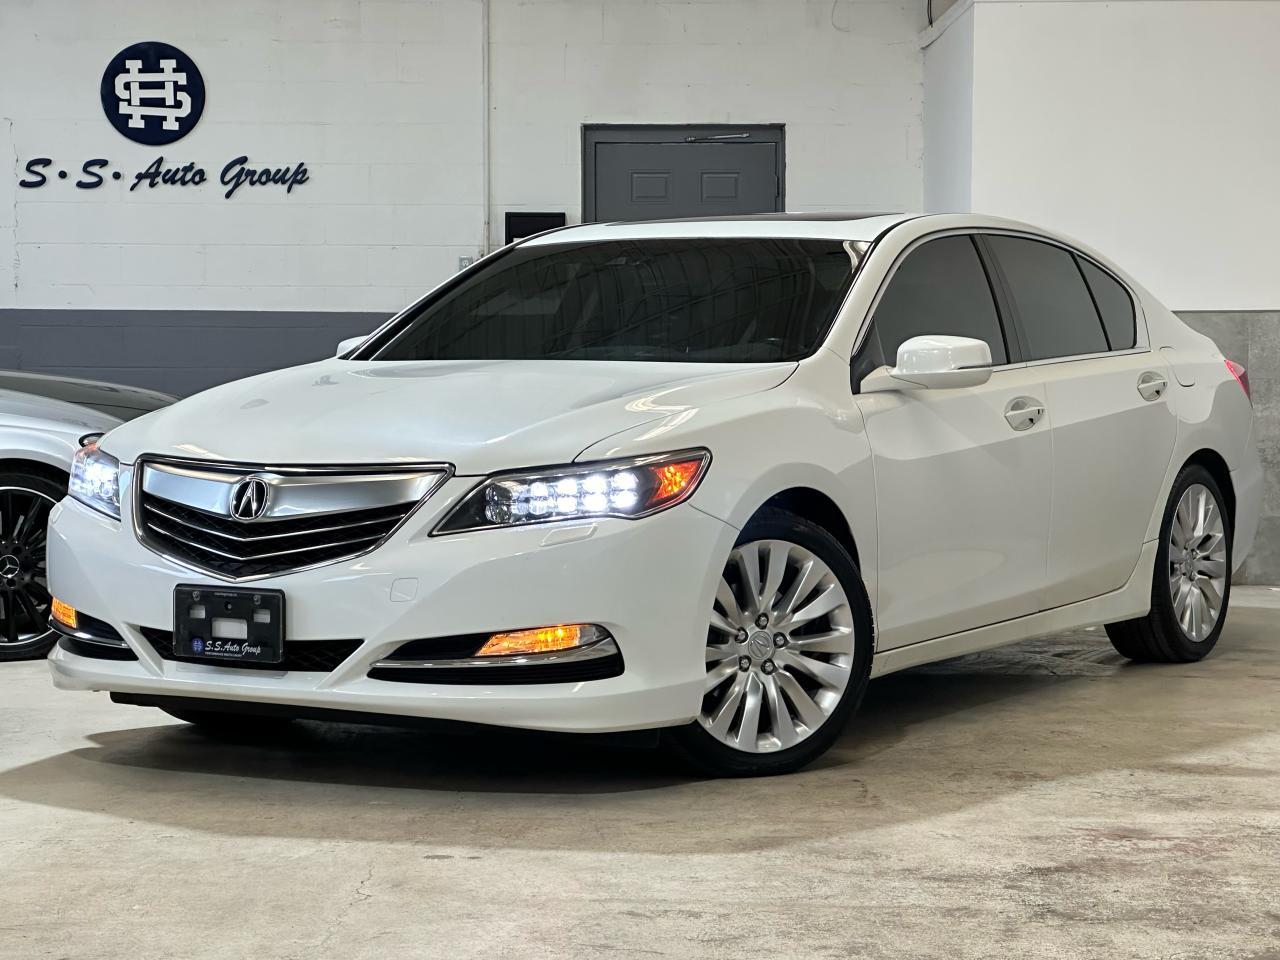 2014 Acura RLX ***SOLD/RESERVED***